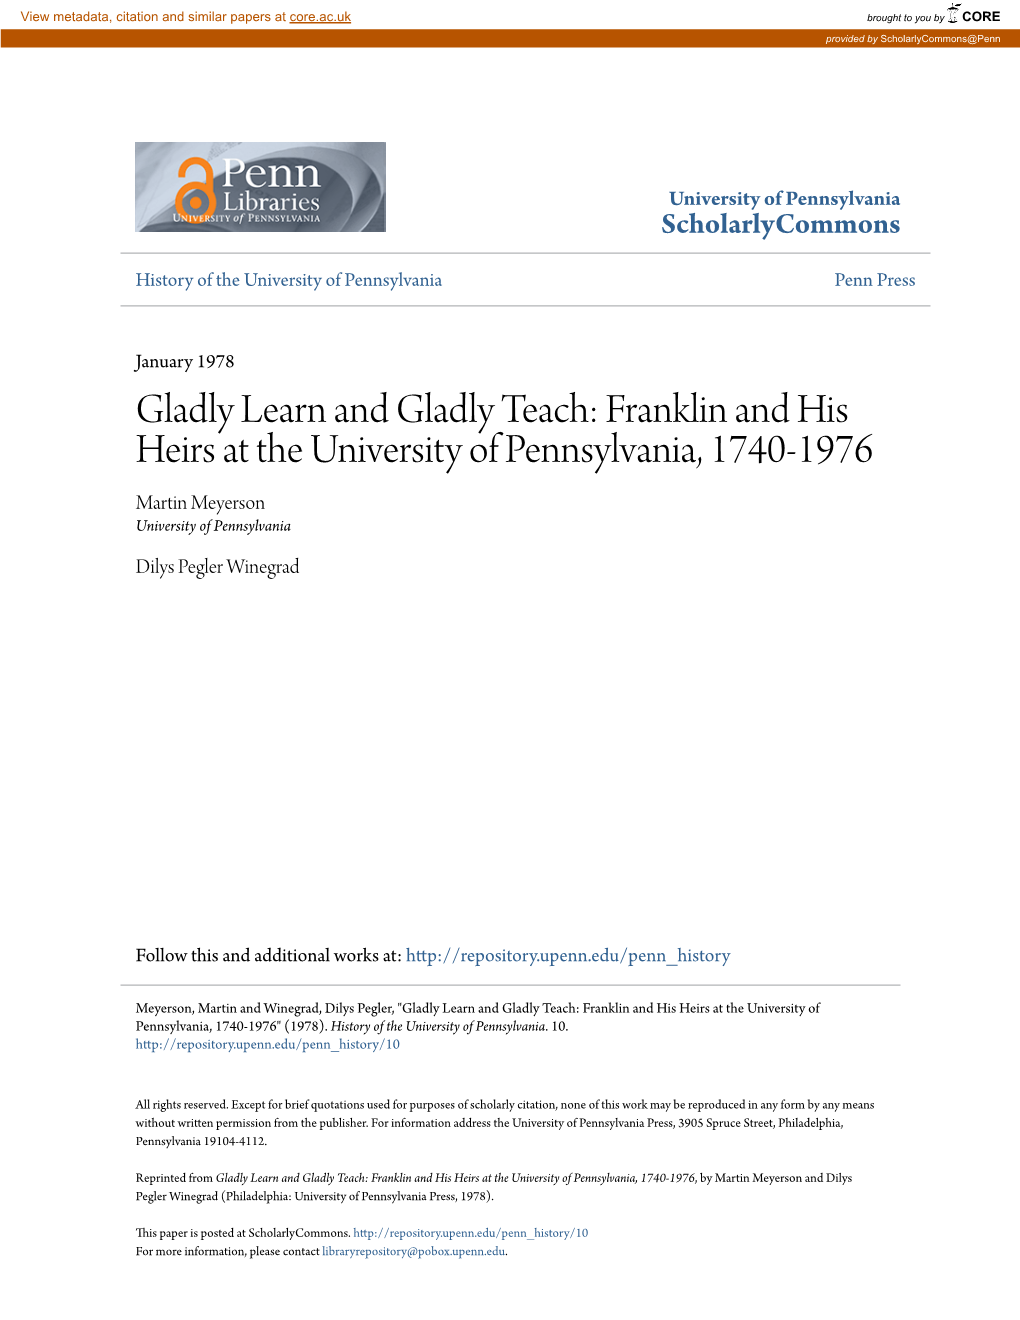 Gladly Learn and Gladly Teach: Franklin and His Heirs at the University of Pennsylvania, 1740-1976 Martin Meyerson University of Pennsylvania